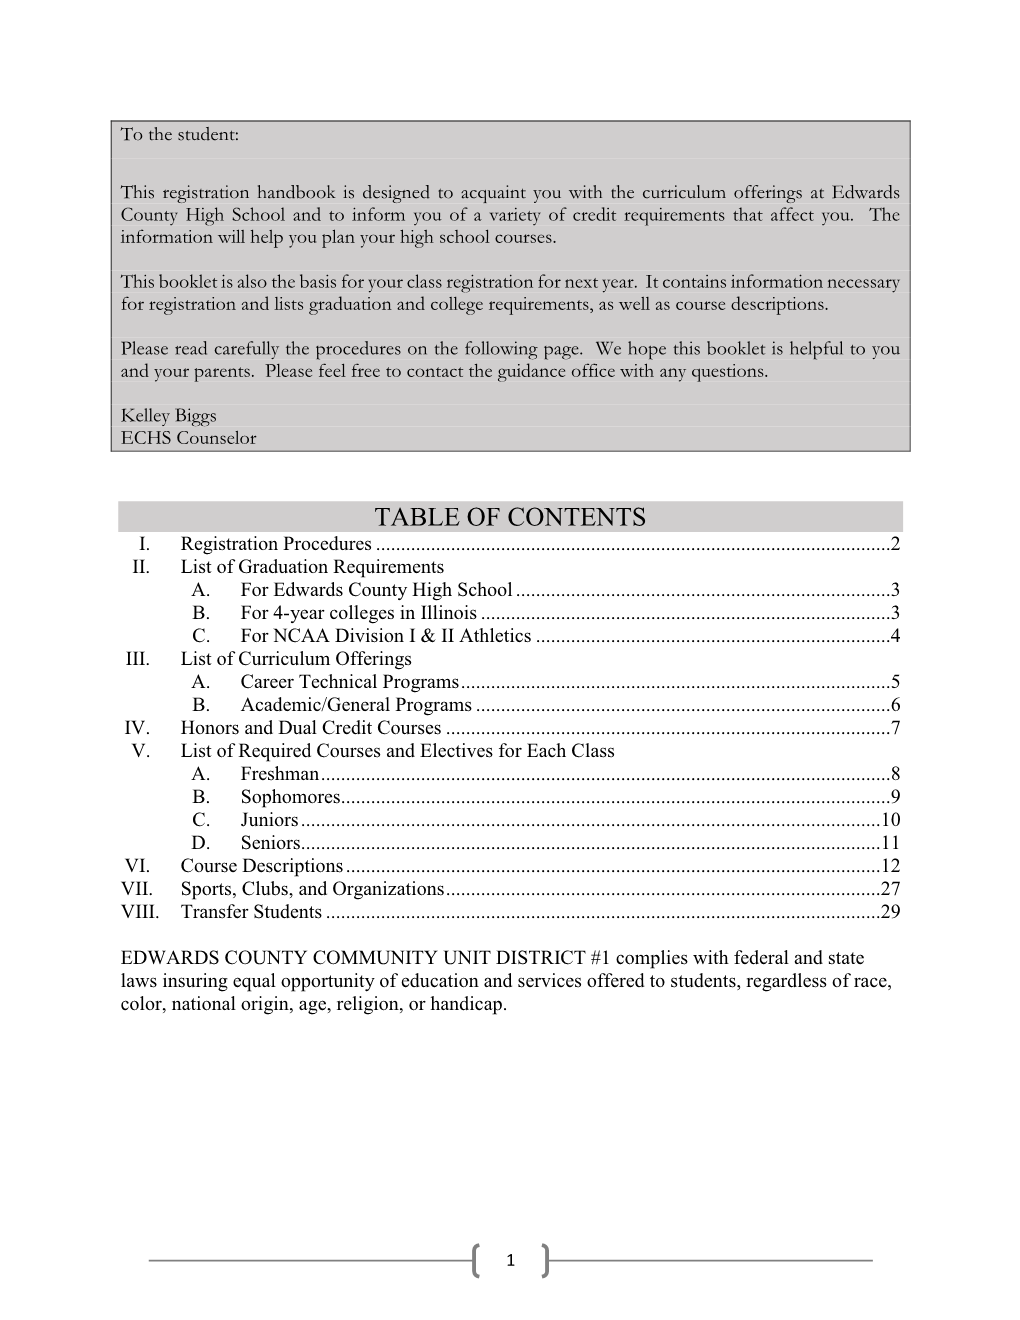 Table of Contents I